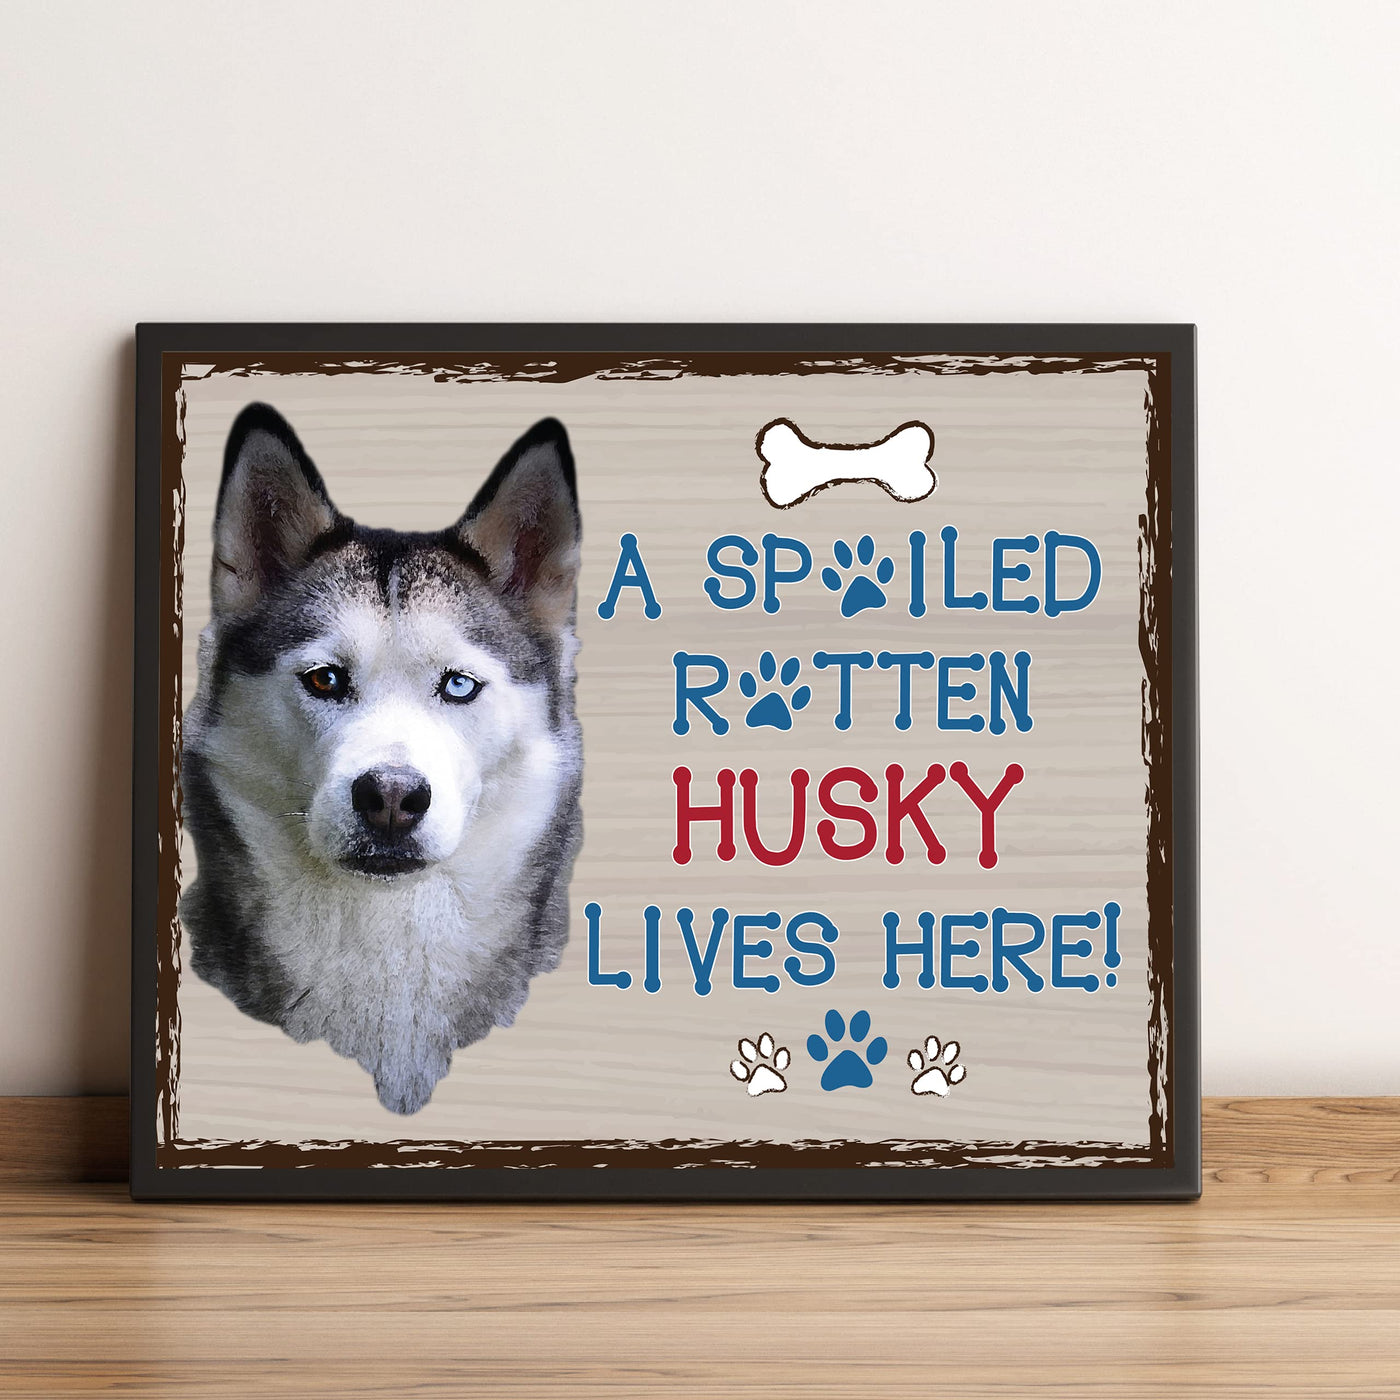 Siberian Husky-Dog Poster Print-10 x 8" Wall Decor Sign-Ready To Frame."A Spoiled Rotten Husky Lives Here". Perfect Pet Wall Art for Home-Kitchen-Cave-Bar-Garage. Great Gift for Siberian Husky Fans!